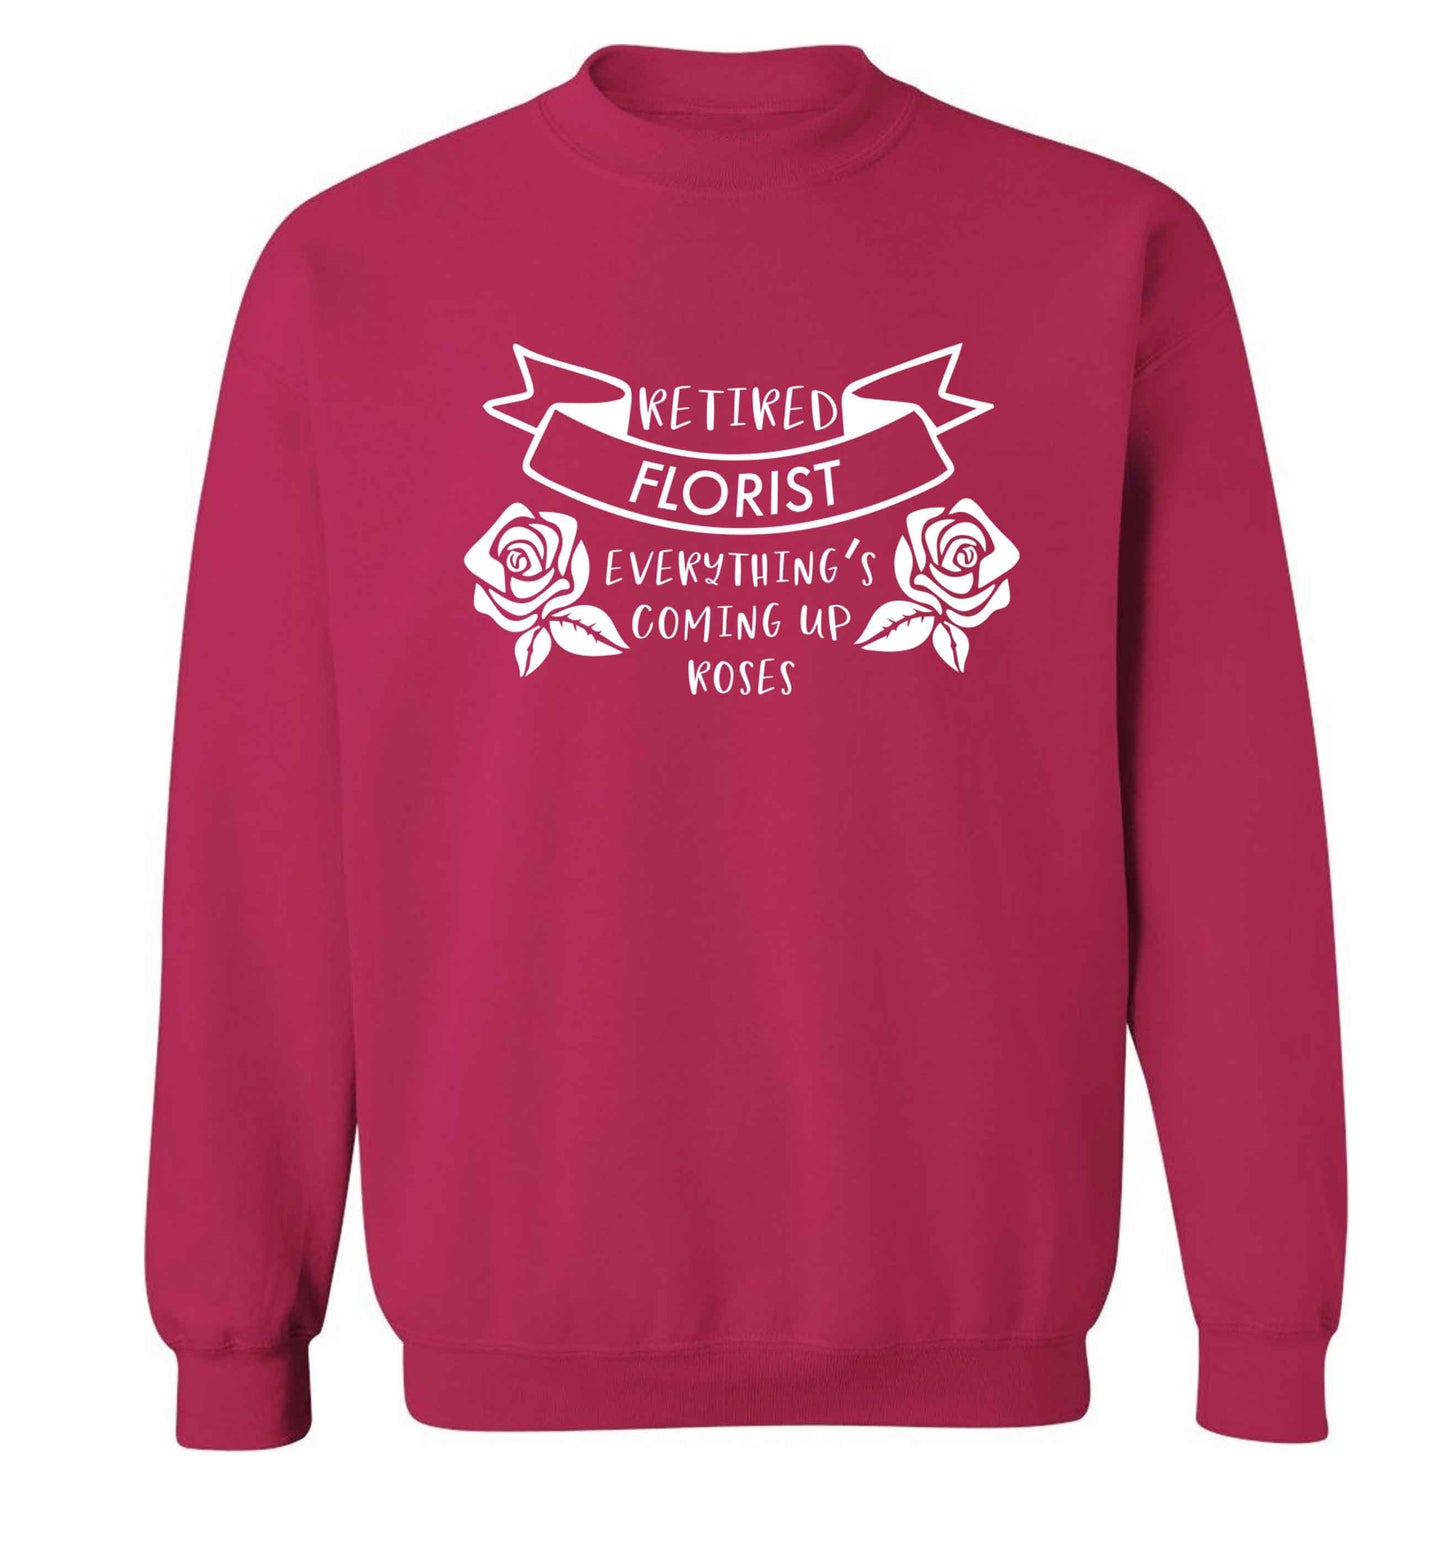 Retired florist everything's coming up roses Adult's unisex pink Sweater 2XL